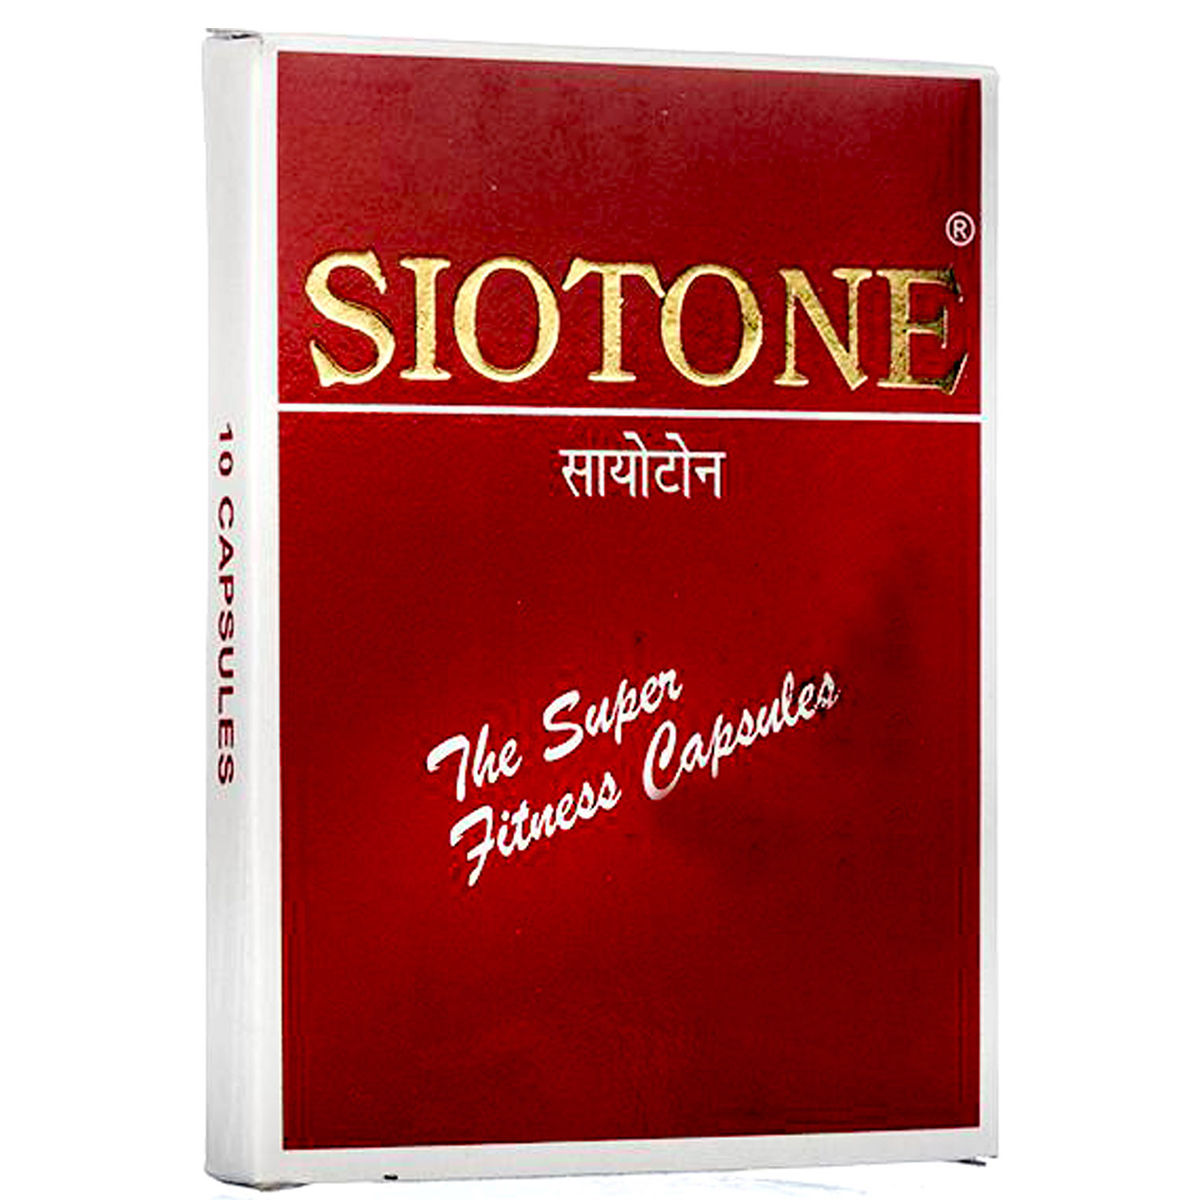 Buy Siotone, 10 Capsules Online